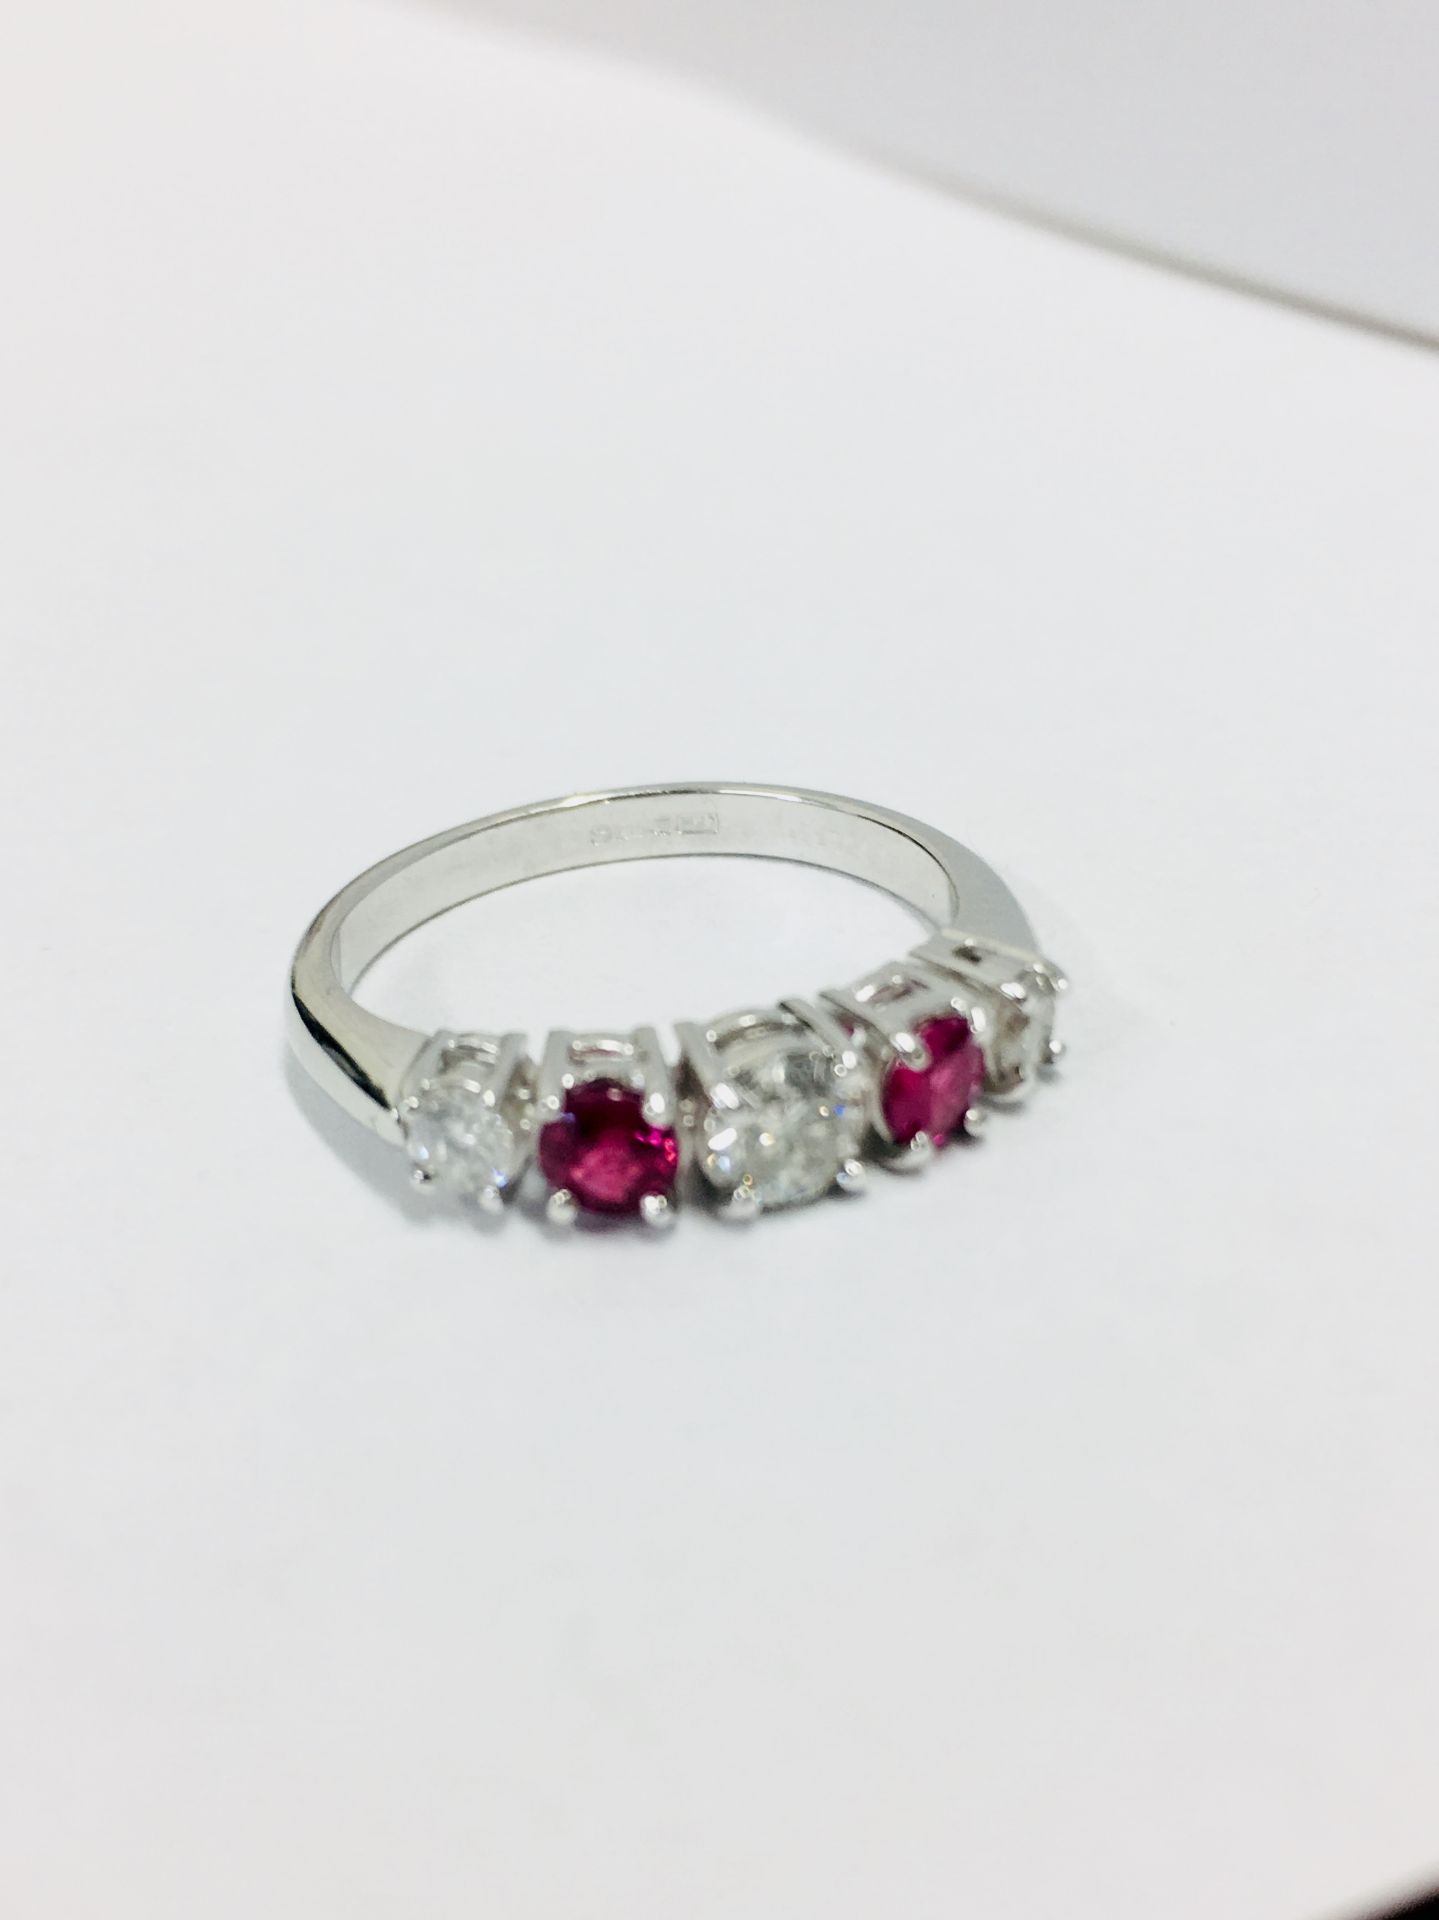 0.75Ct Ruby And Diamond Five Stone Ringset In 18Ct Gold. - Image 6 of 7